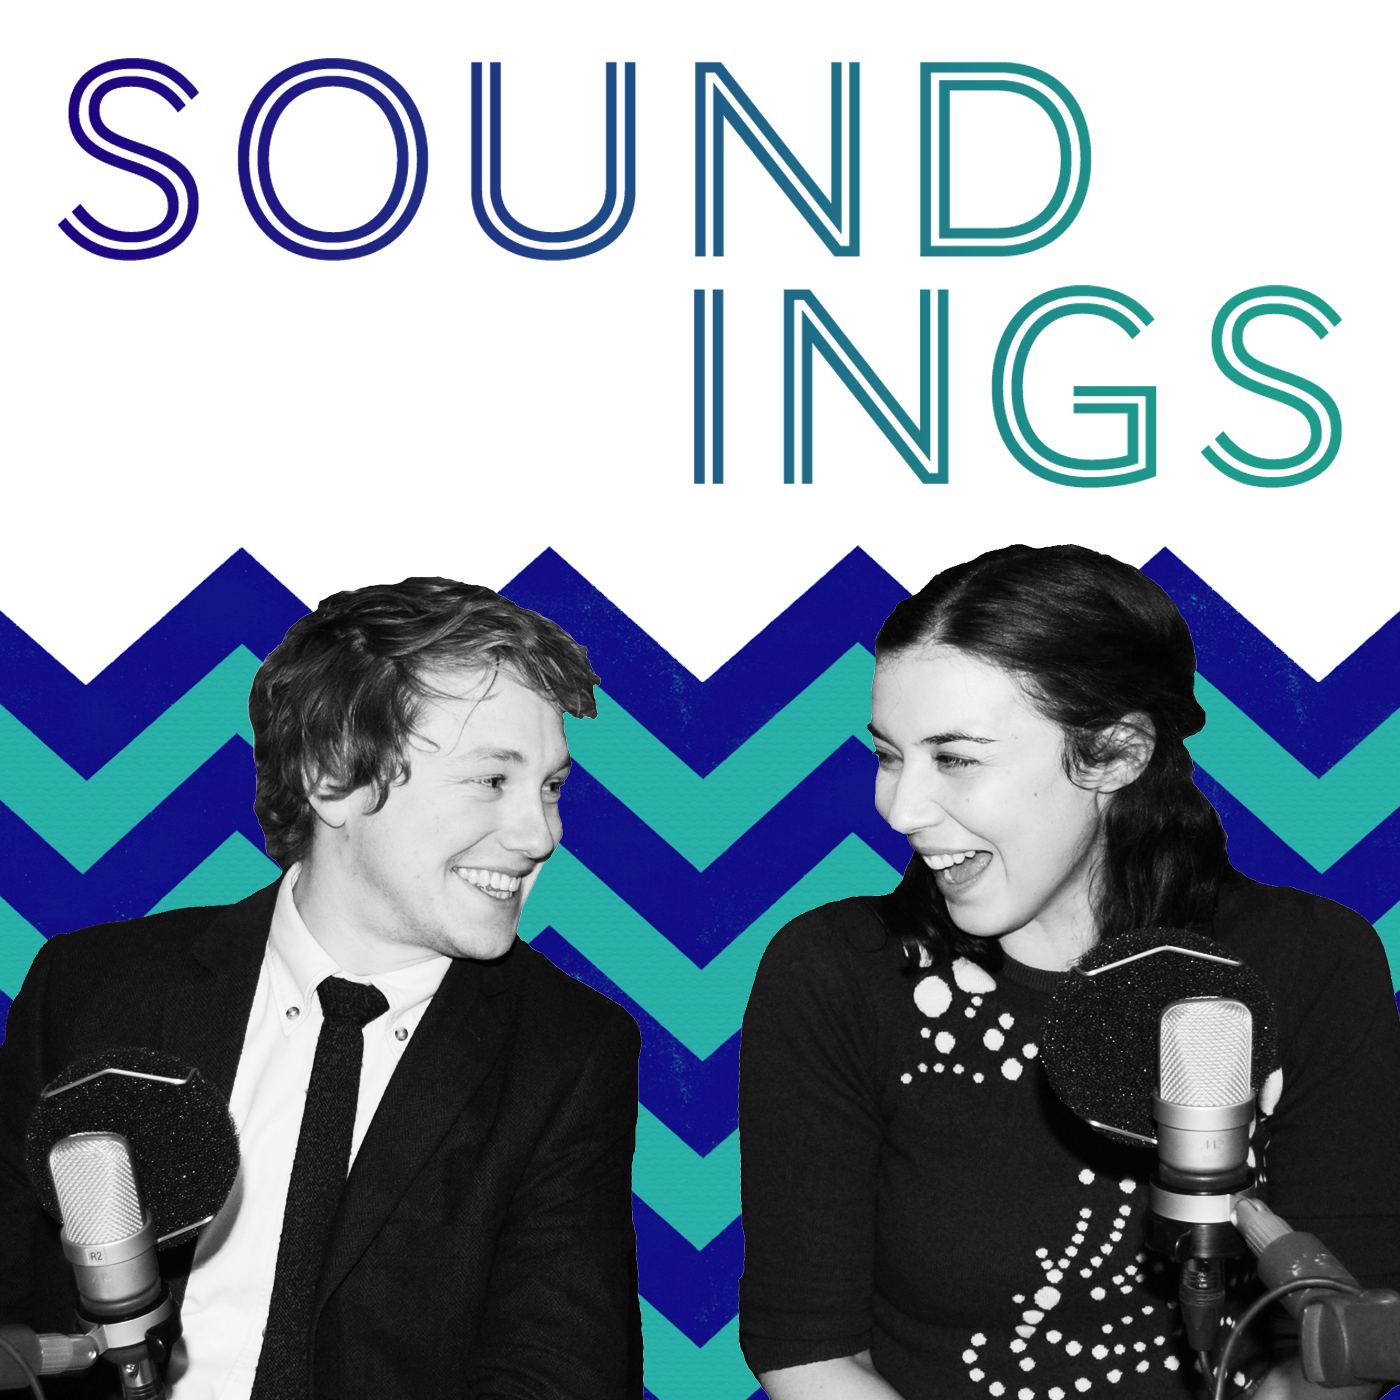 Soundings S1 E10: Cave Outing - The Desensitization of Lisa Hannigan